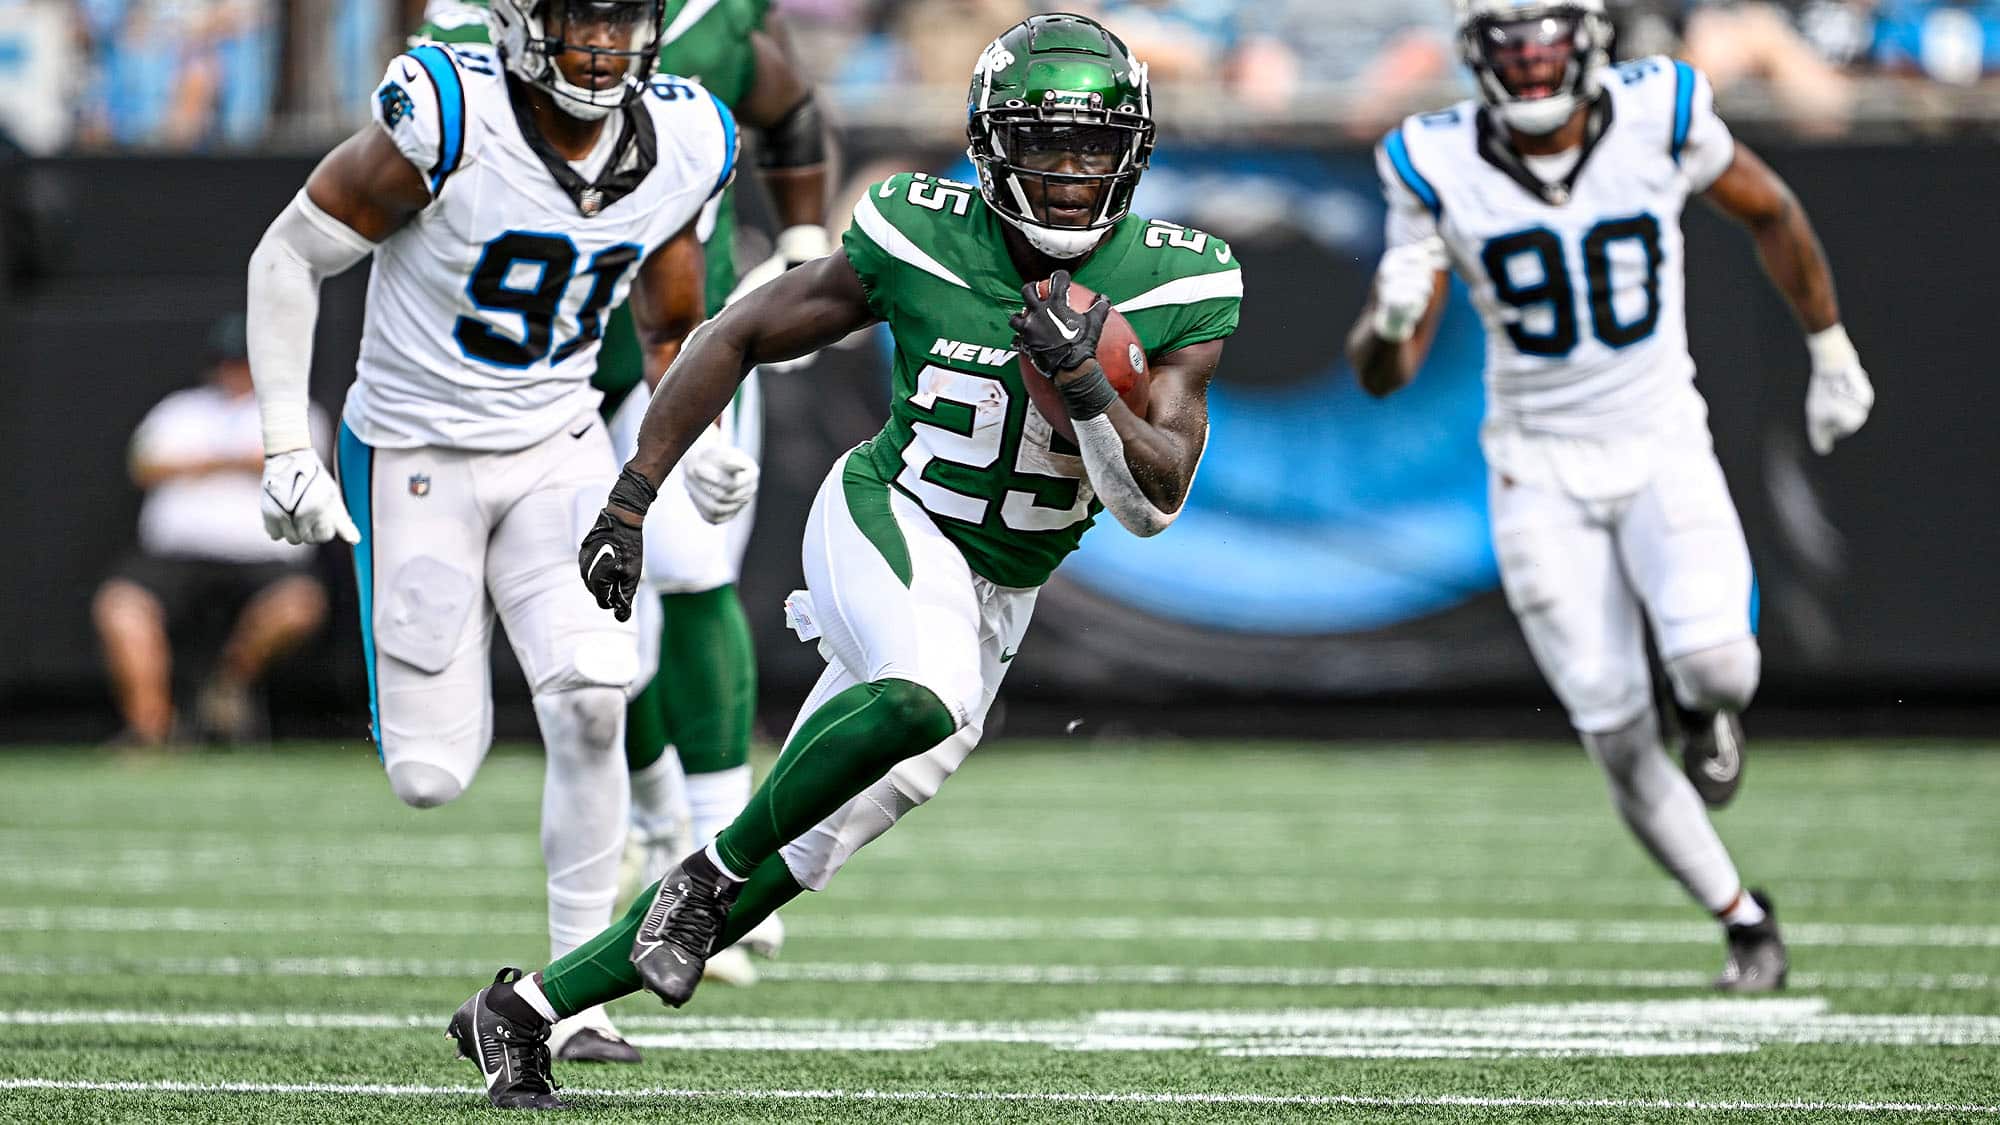 Carter is back, Izzy flashes: Film breakdown of NY Jets RBs